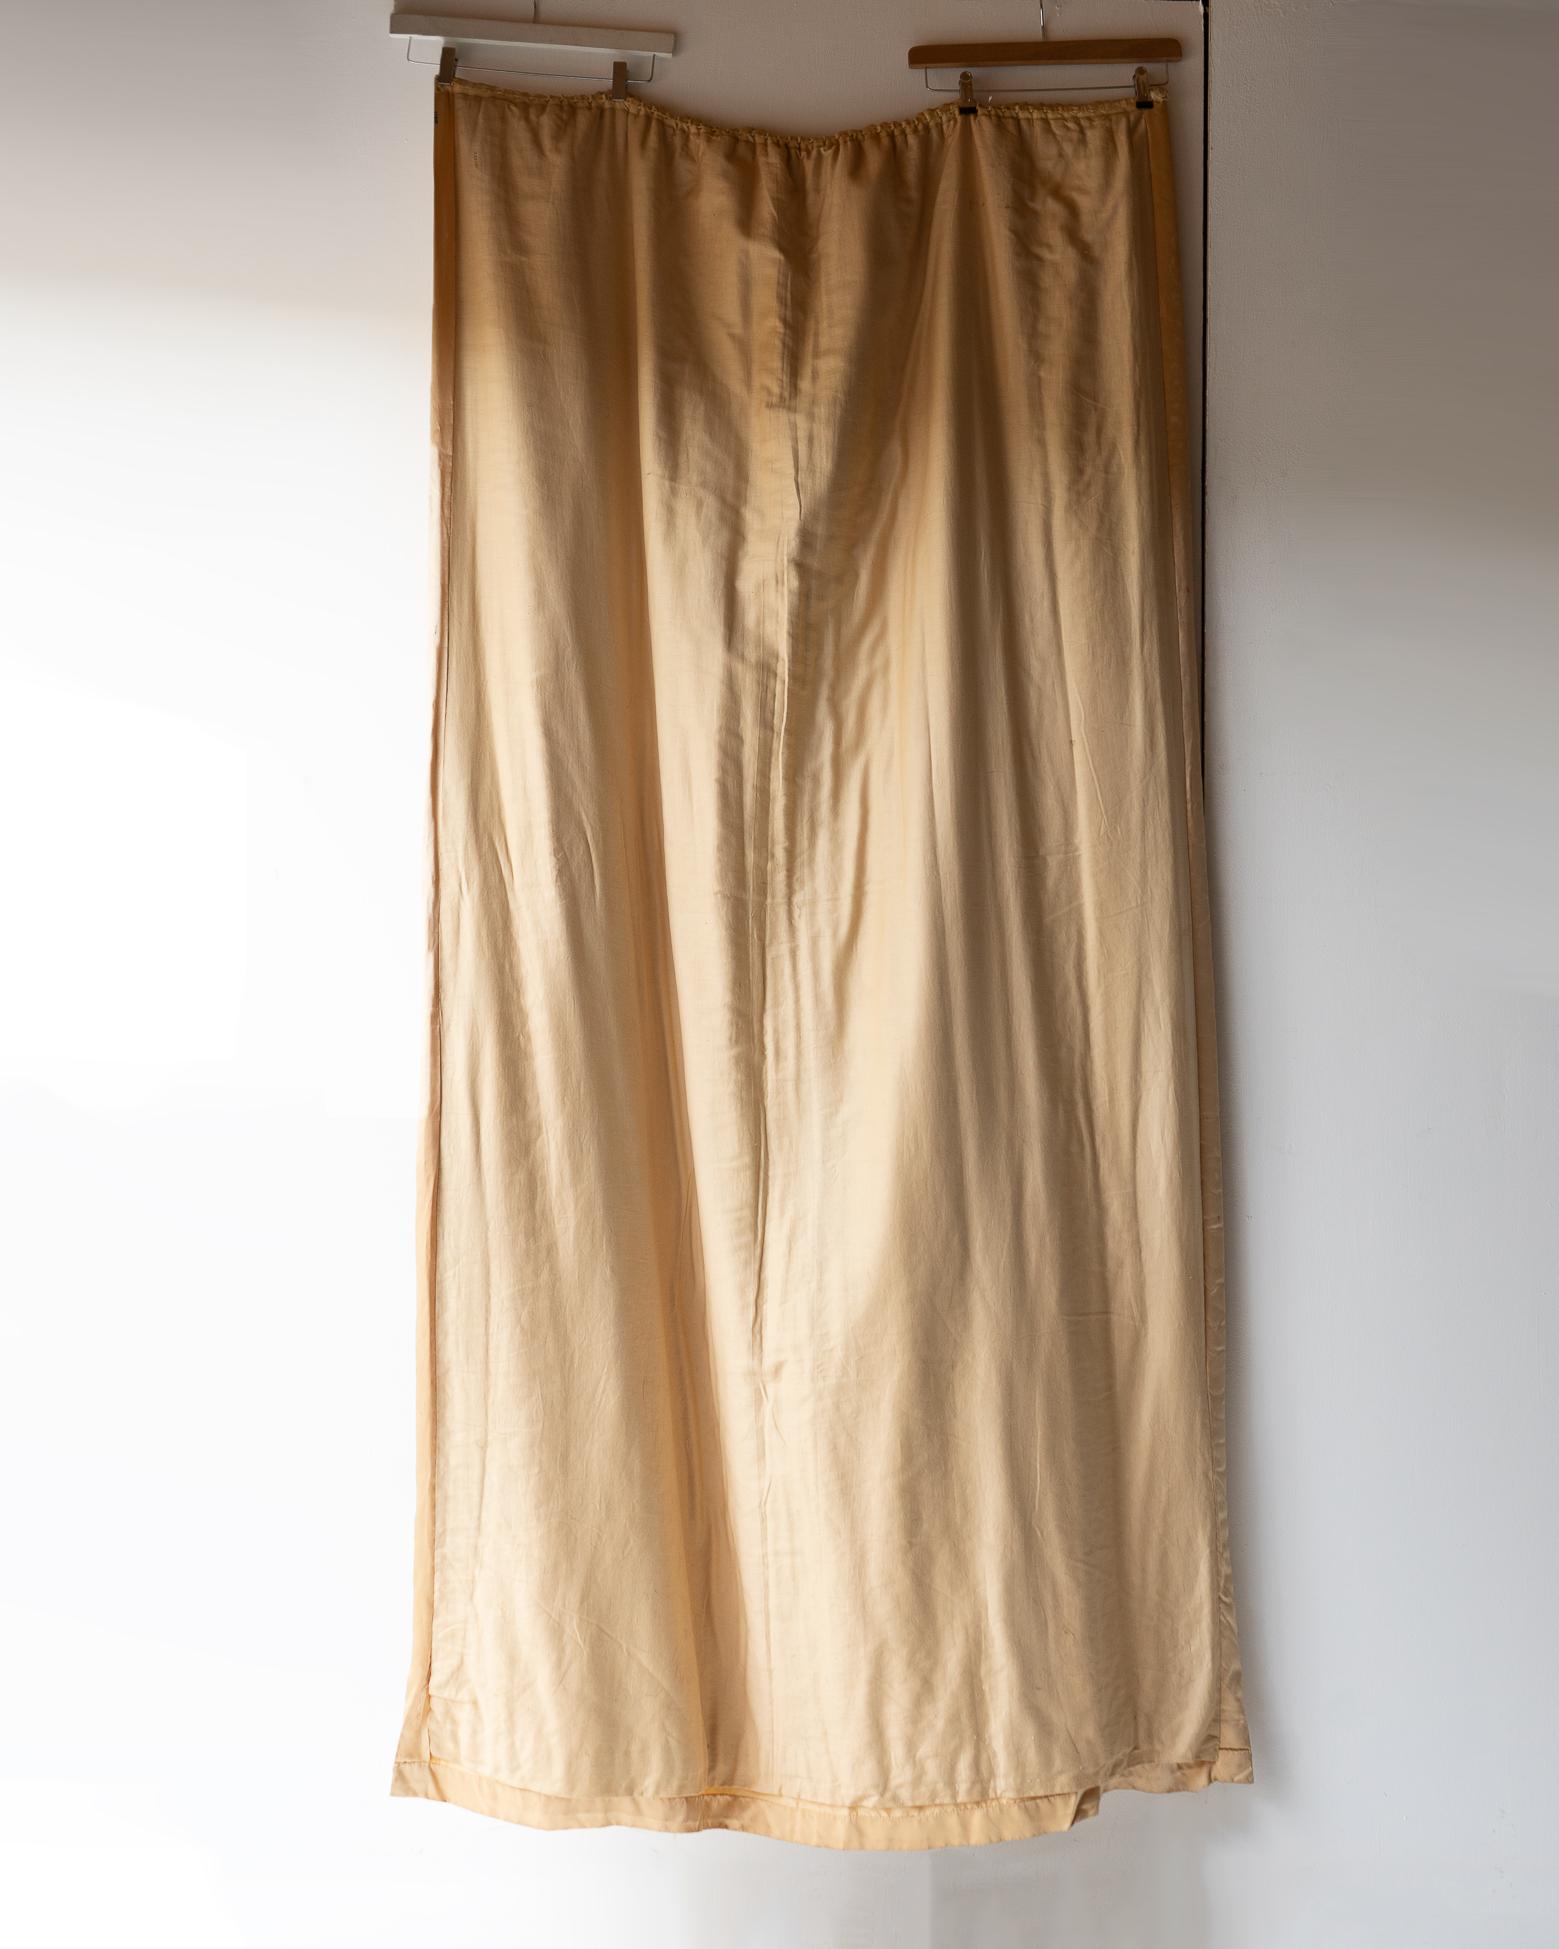 PAIR OF VINTAGE FLORAL EMBROIDERED LINED PEACH SILK CURTAINS WITH PELMET, 1920s 8